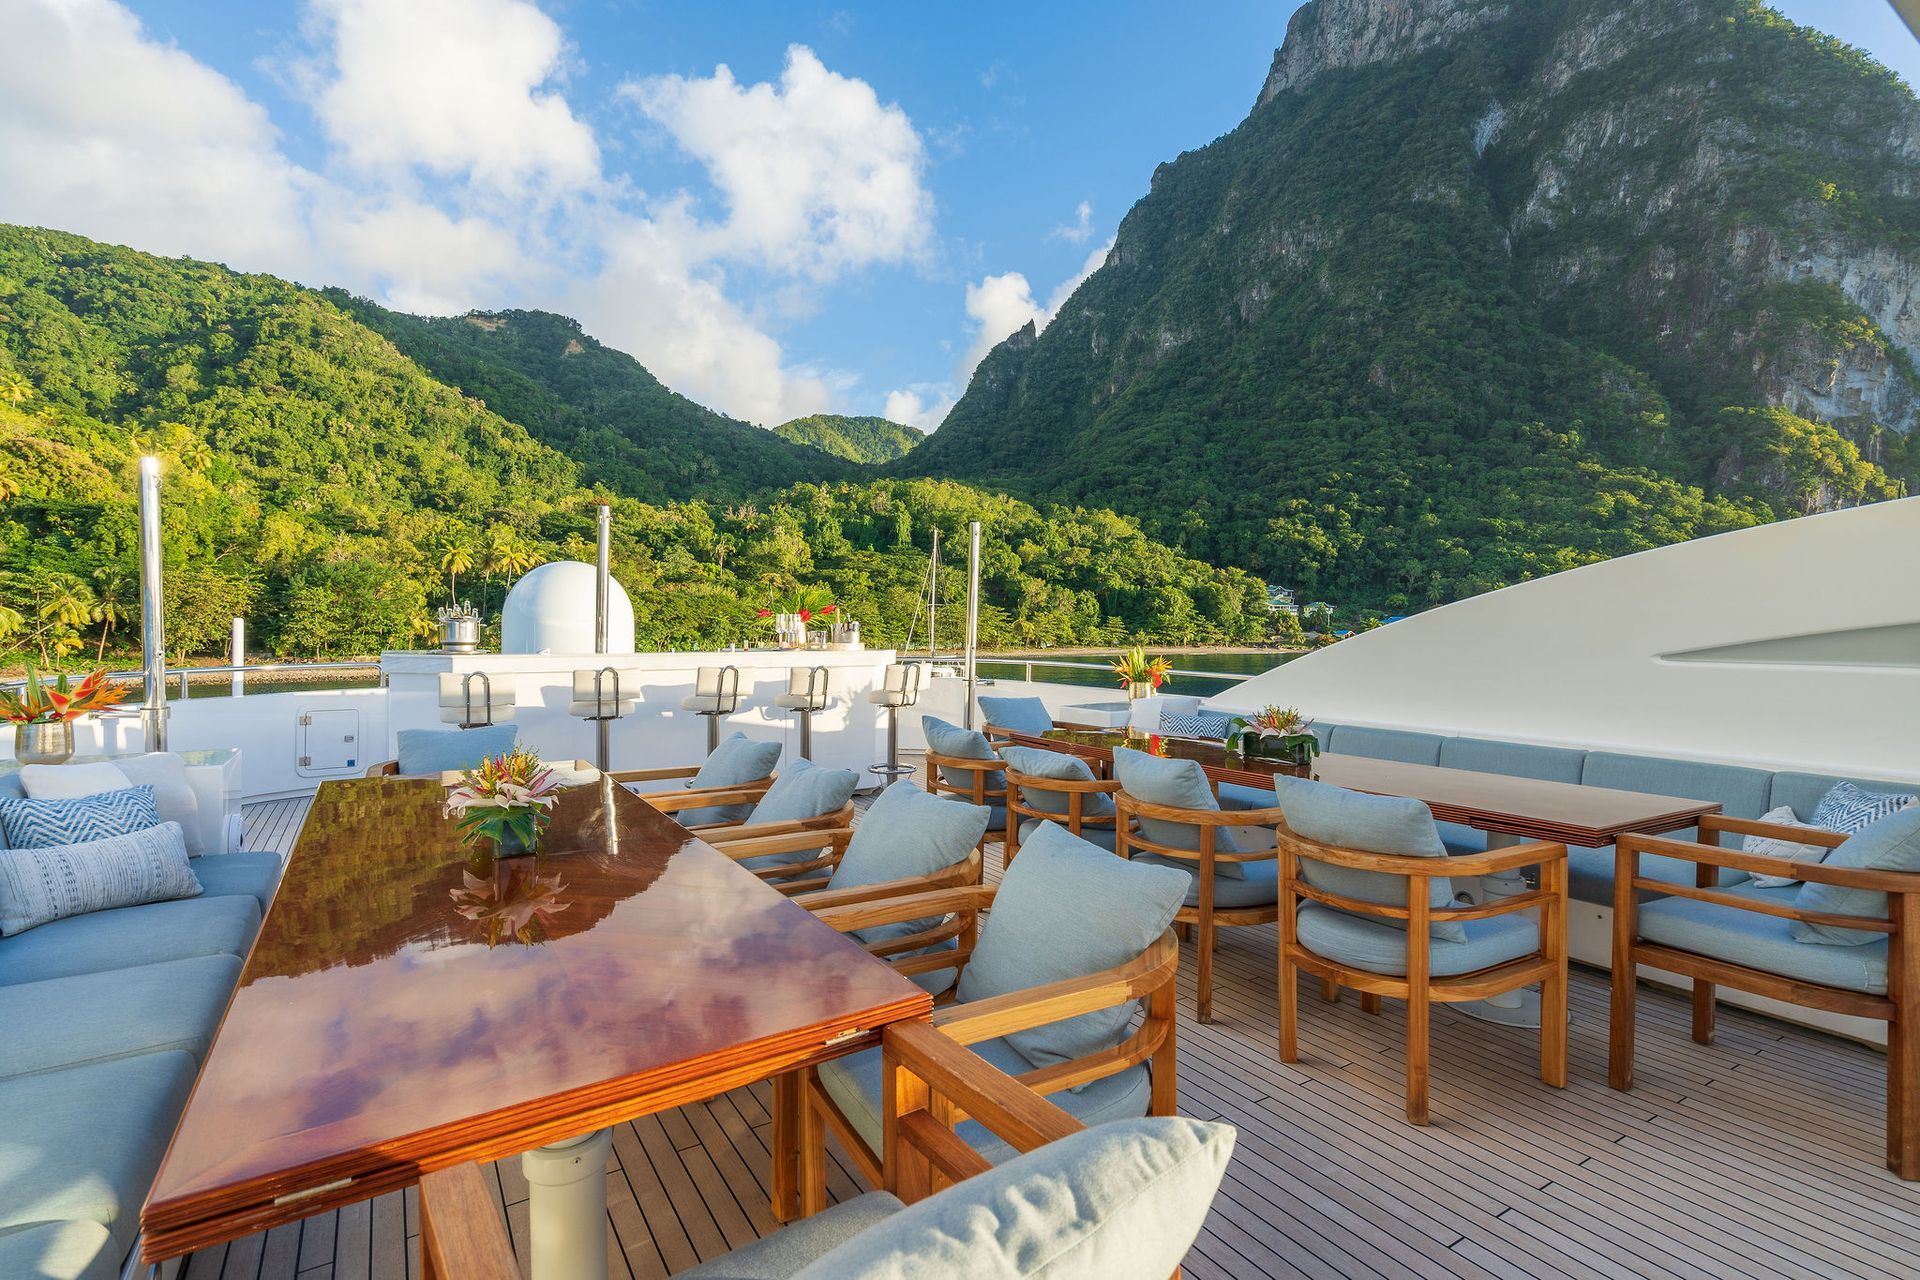 there is a table and chairs on the deck of a yacht with mountains in the background